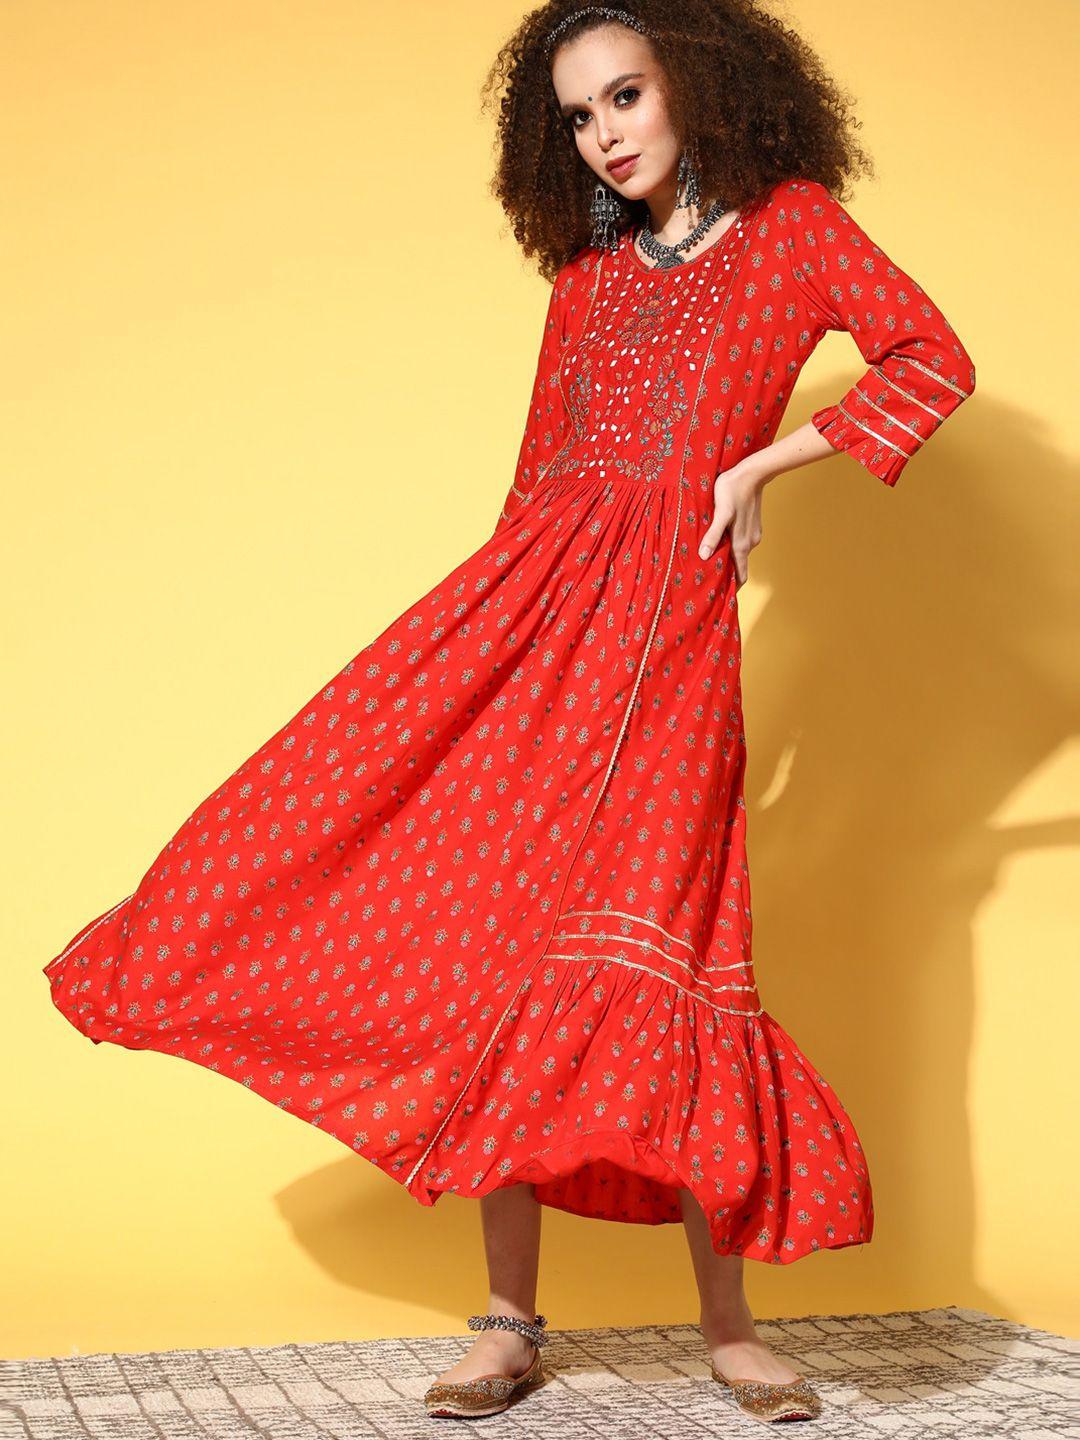 sangria red ethnic motifs printed embellished a-line maxi ethnic dress